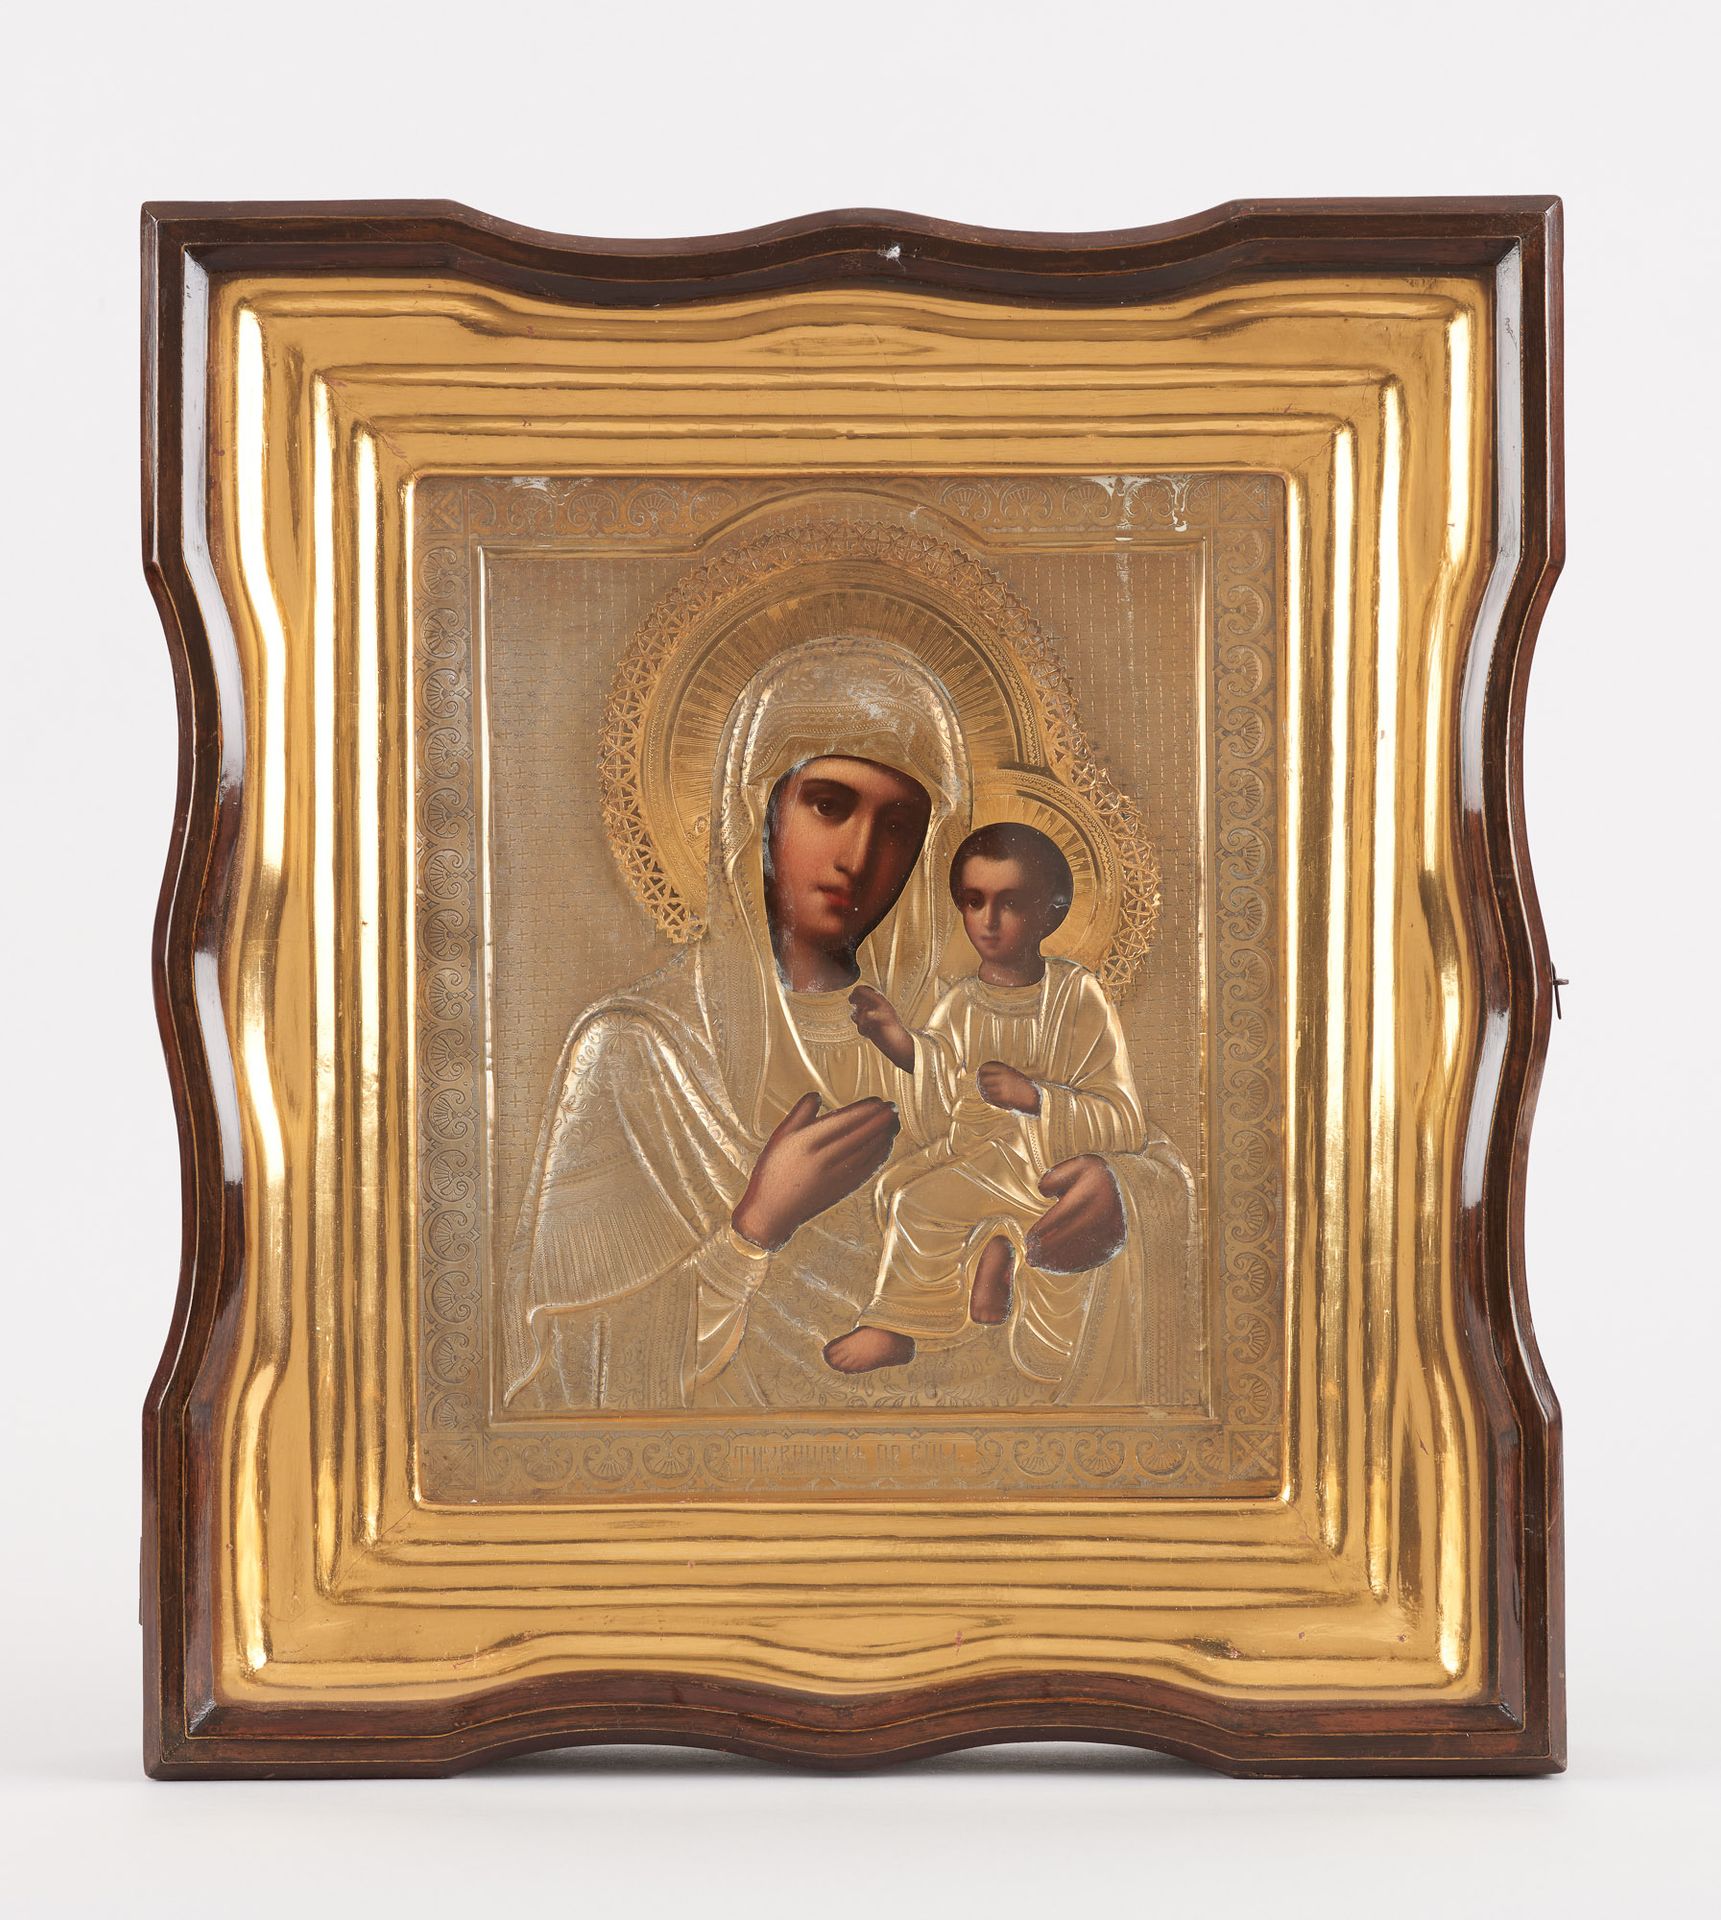 Travail russe. Icon on wood: Virgin and Child with silver rizza.

Marked 84 solo&hellip;